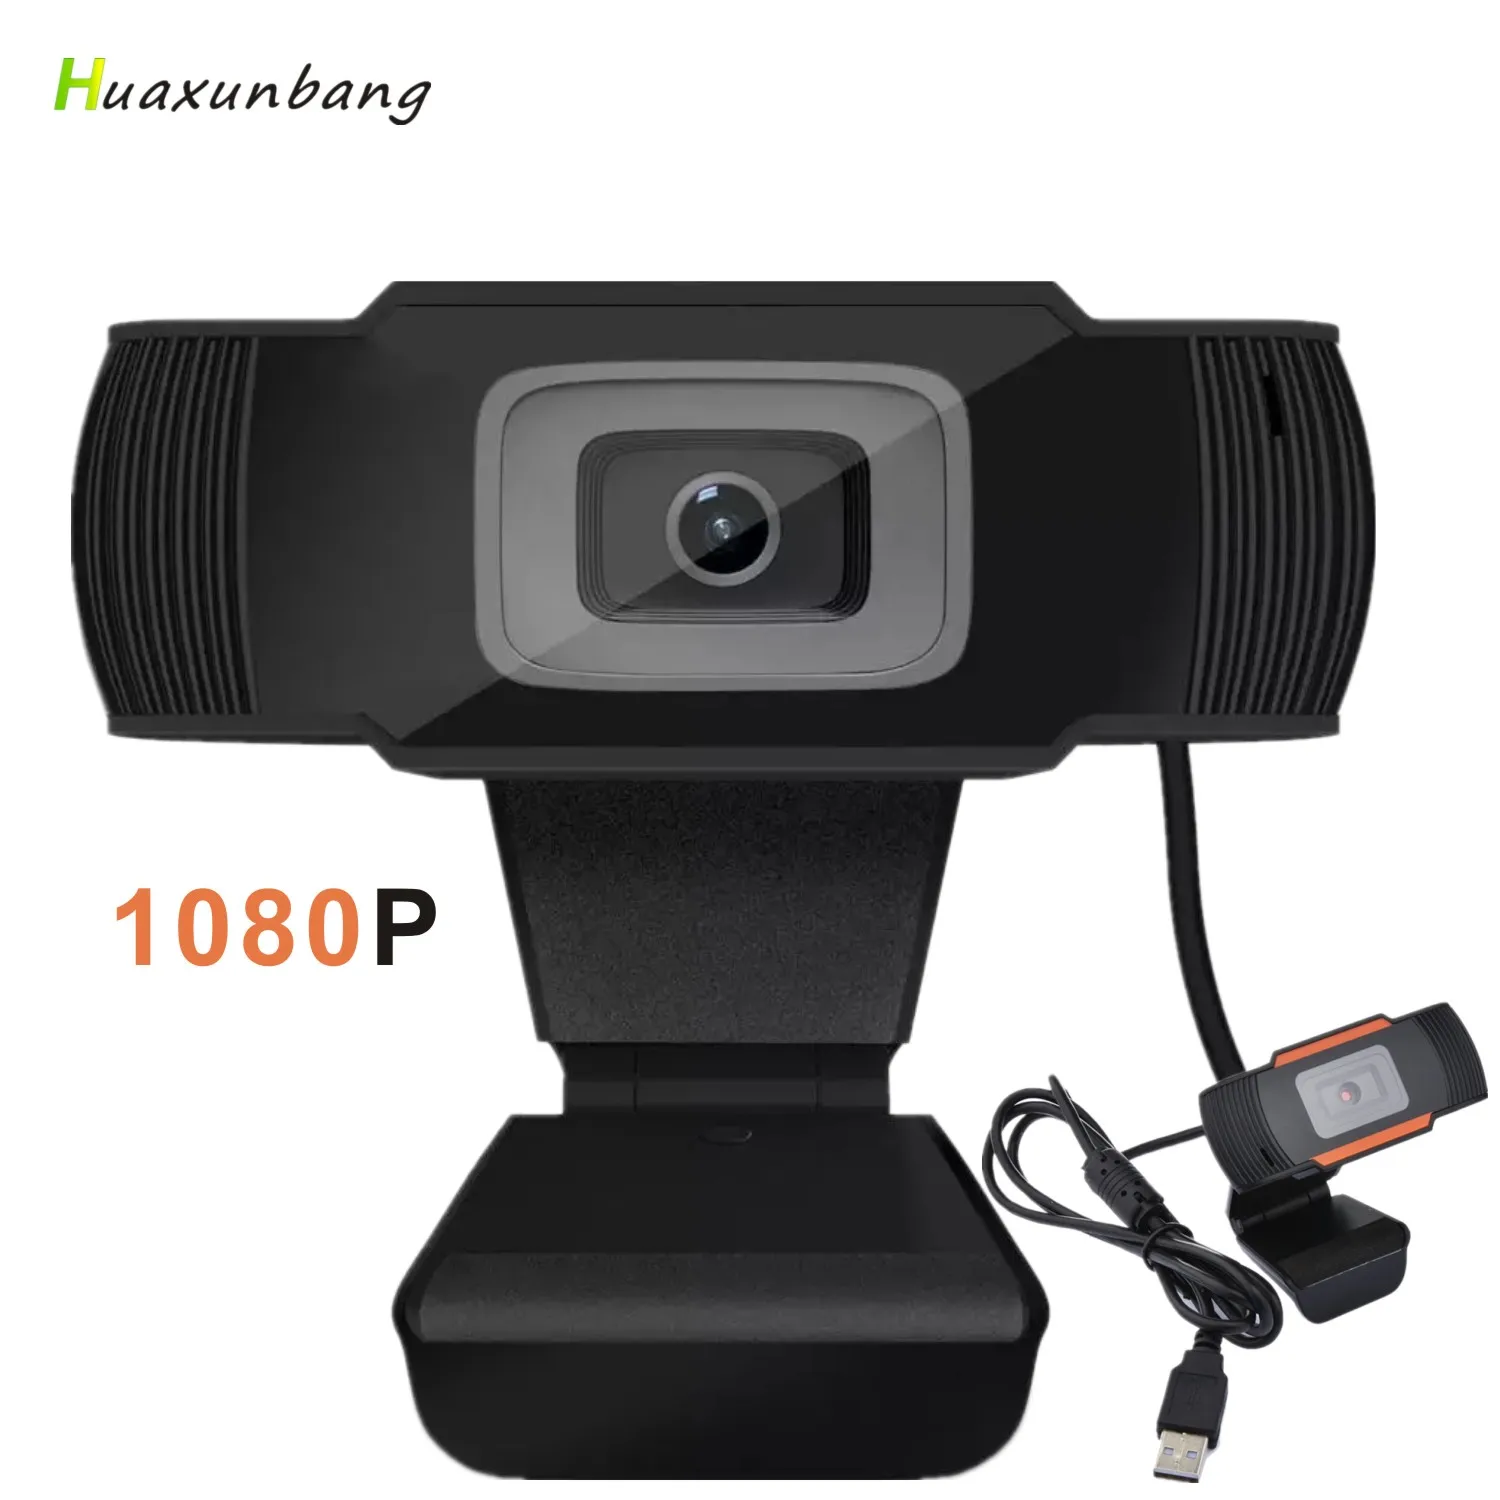 

HD 1080P Webcam Web Camera With Microphone Video Cam Mini Webcan USB YouTube Office Gamer Cameras For PC Laptop Computer Webcams